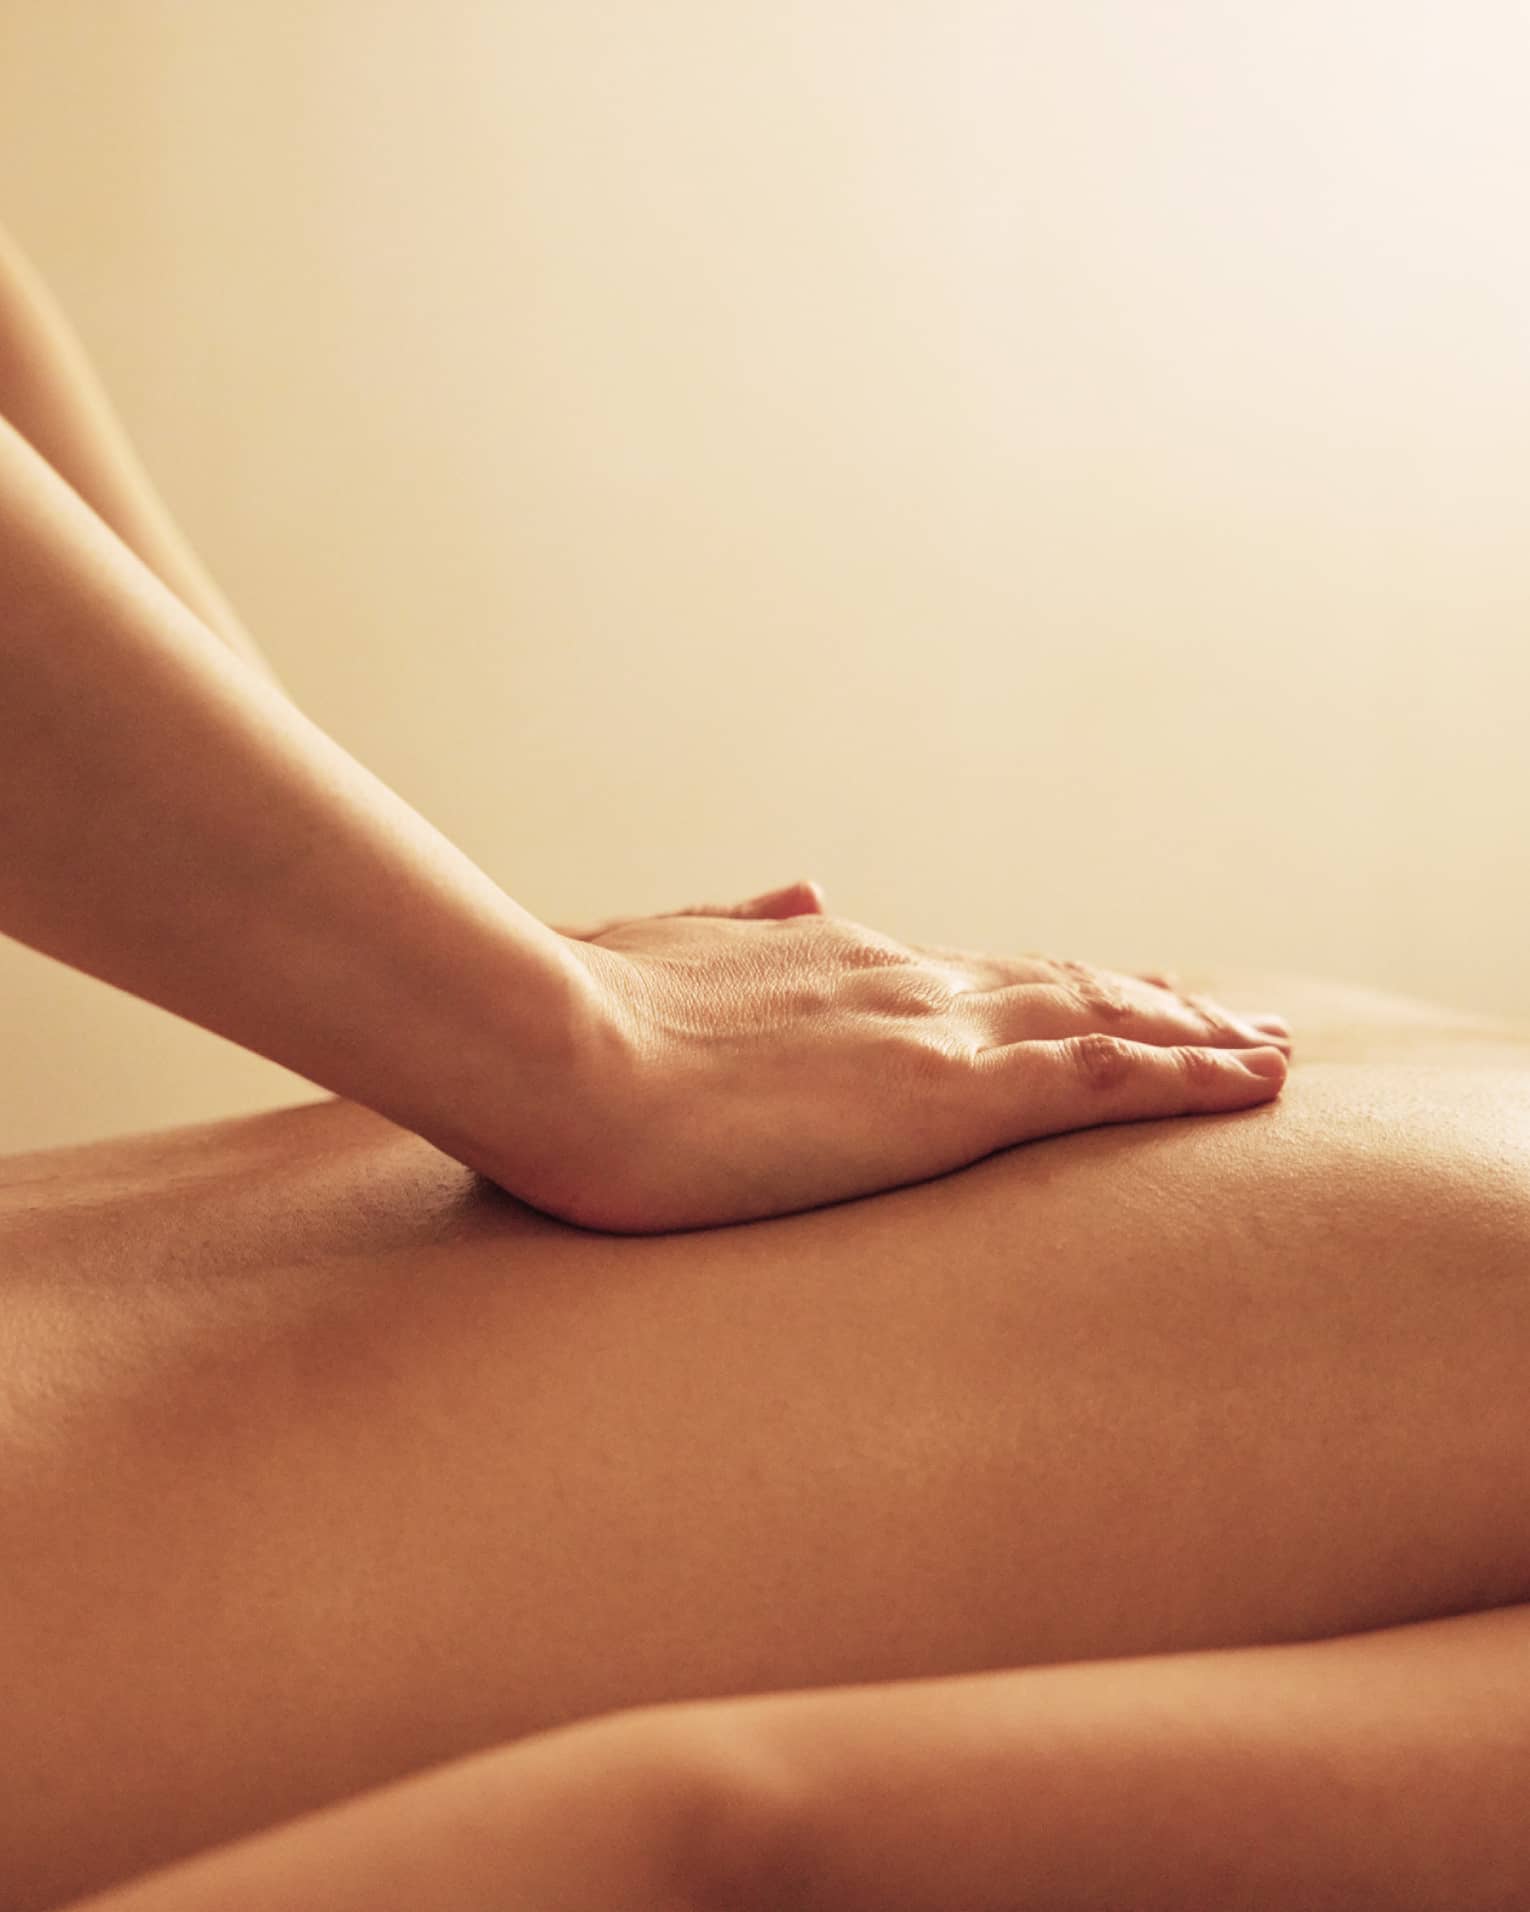 Masseuse rests hands on woman's bare back as she lays on massage table